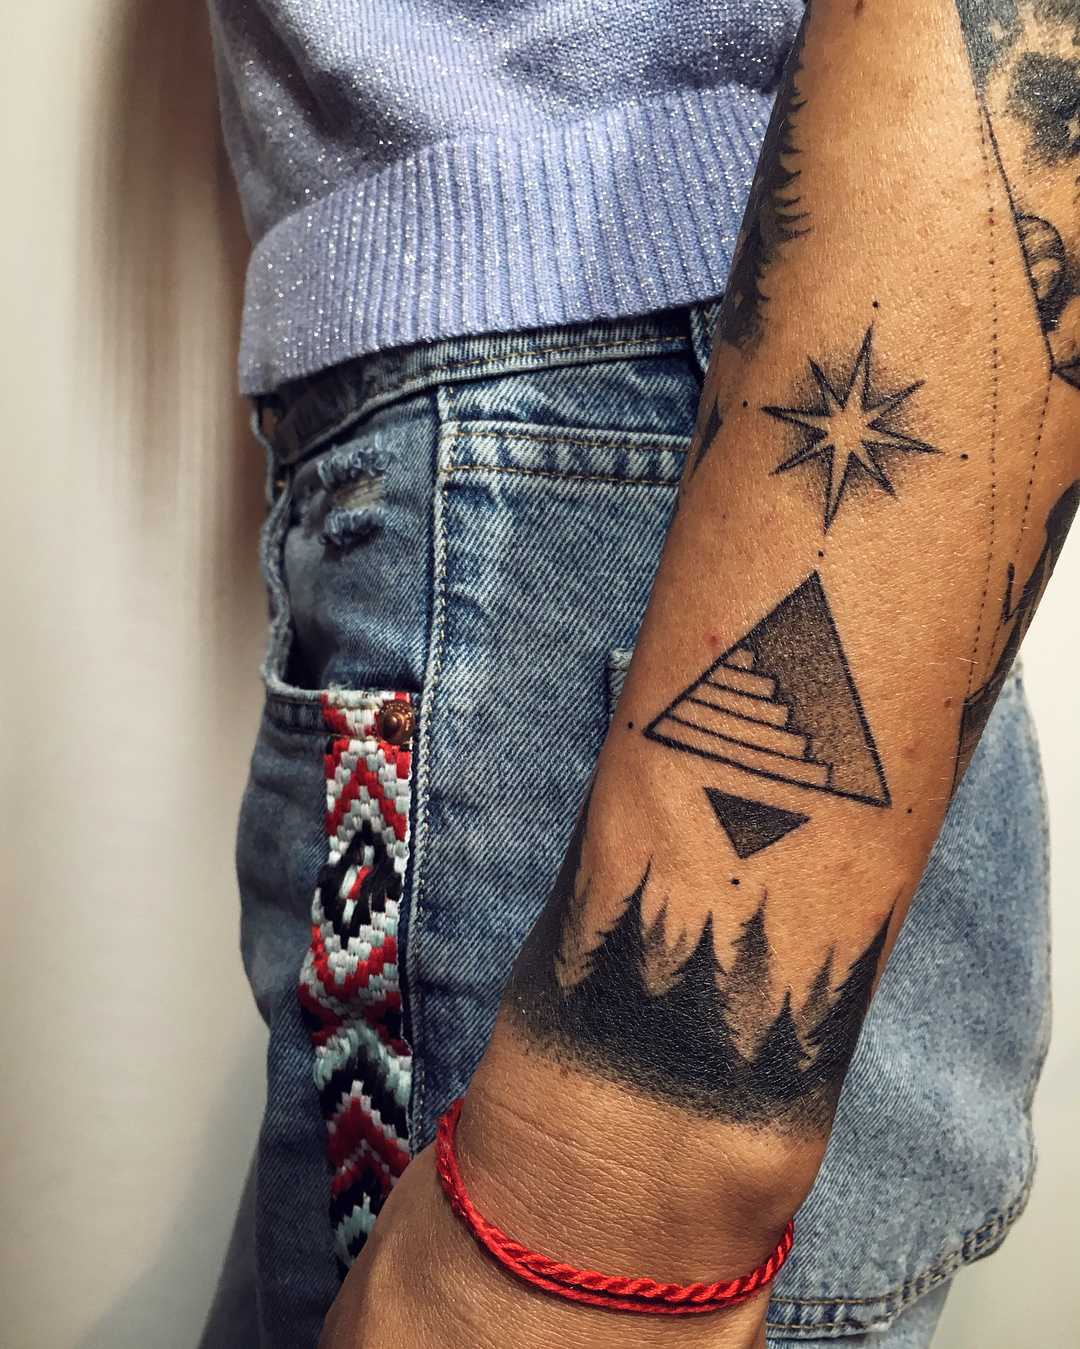 North star, stairway and forest tattoo by Sasha Kiseleva - Tattoogrid.net